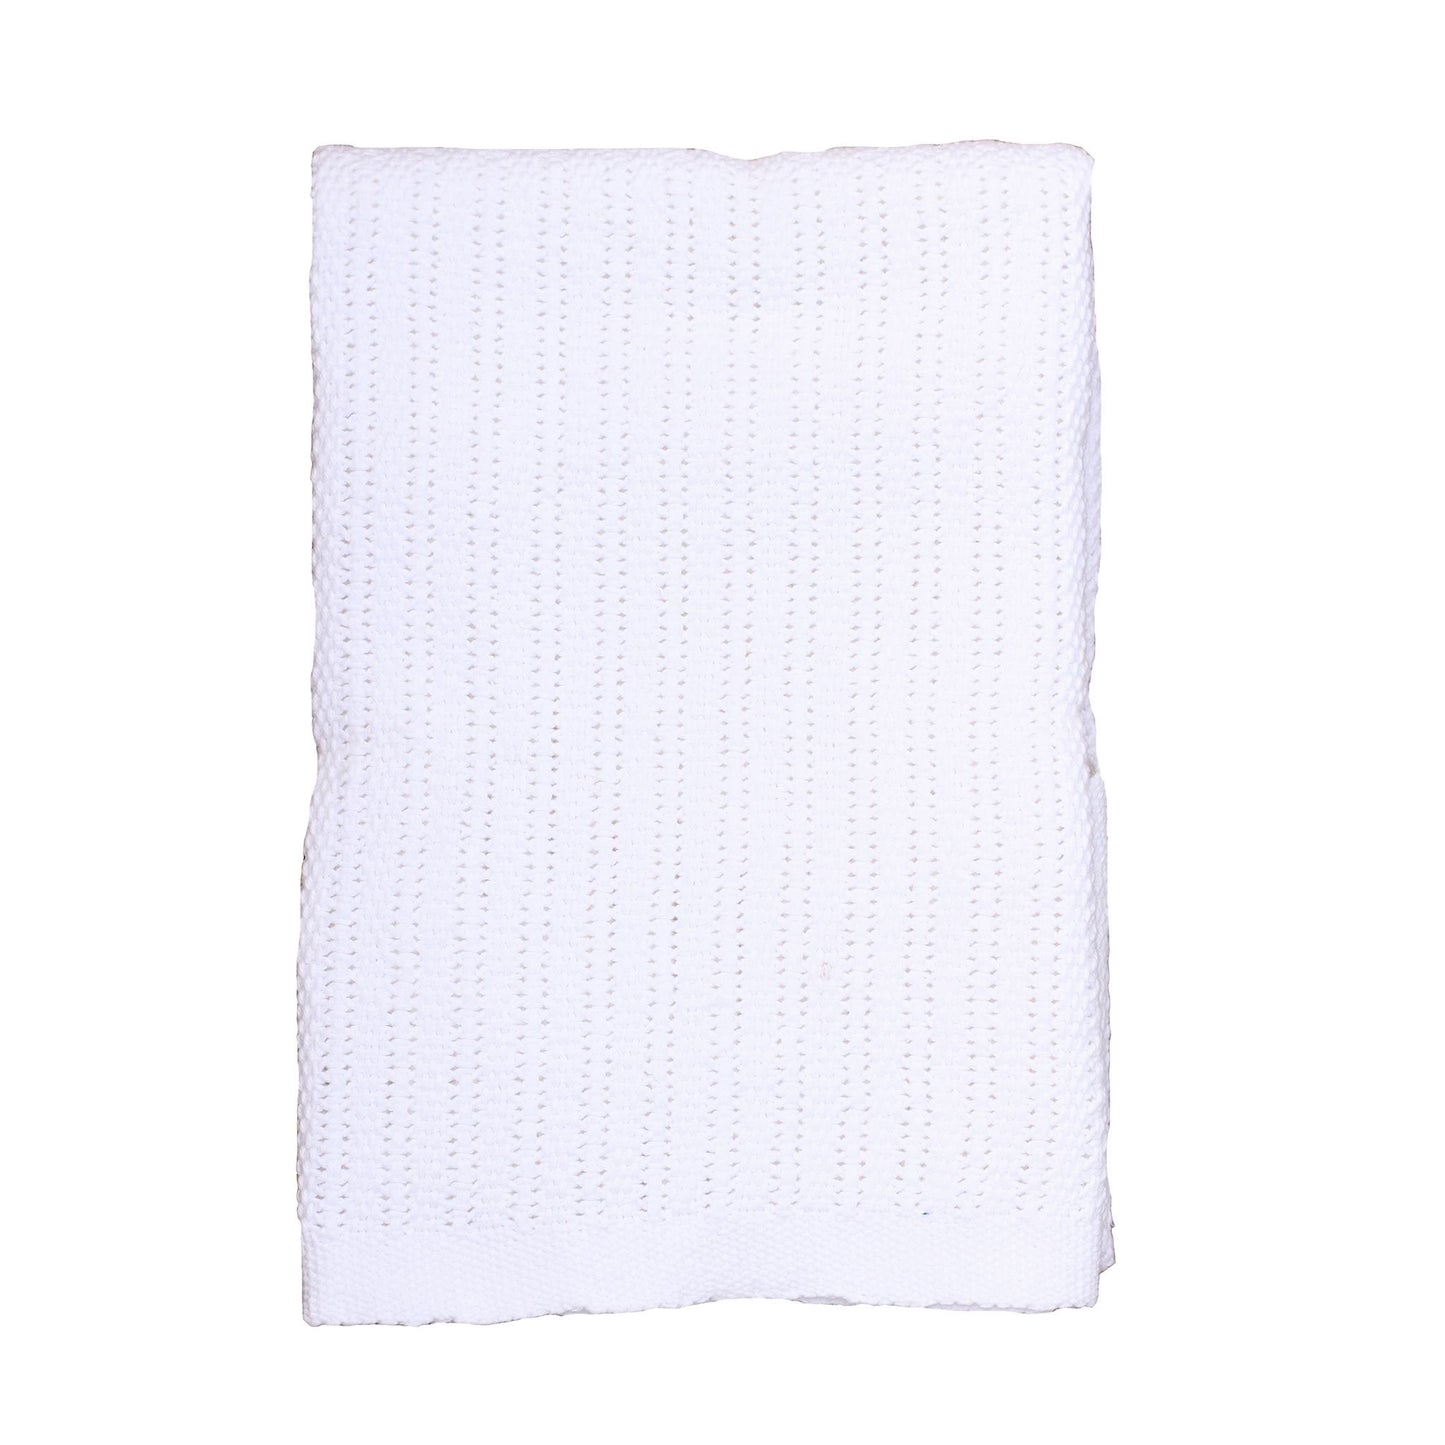 Hippychick Cellular Blanket (Pure White)